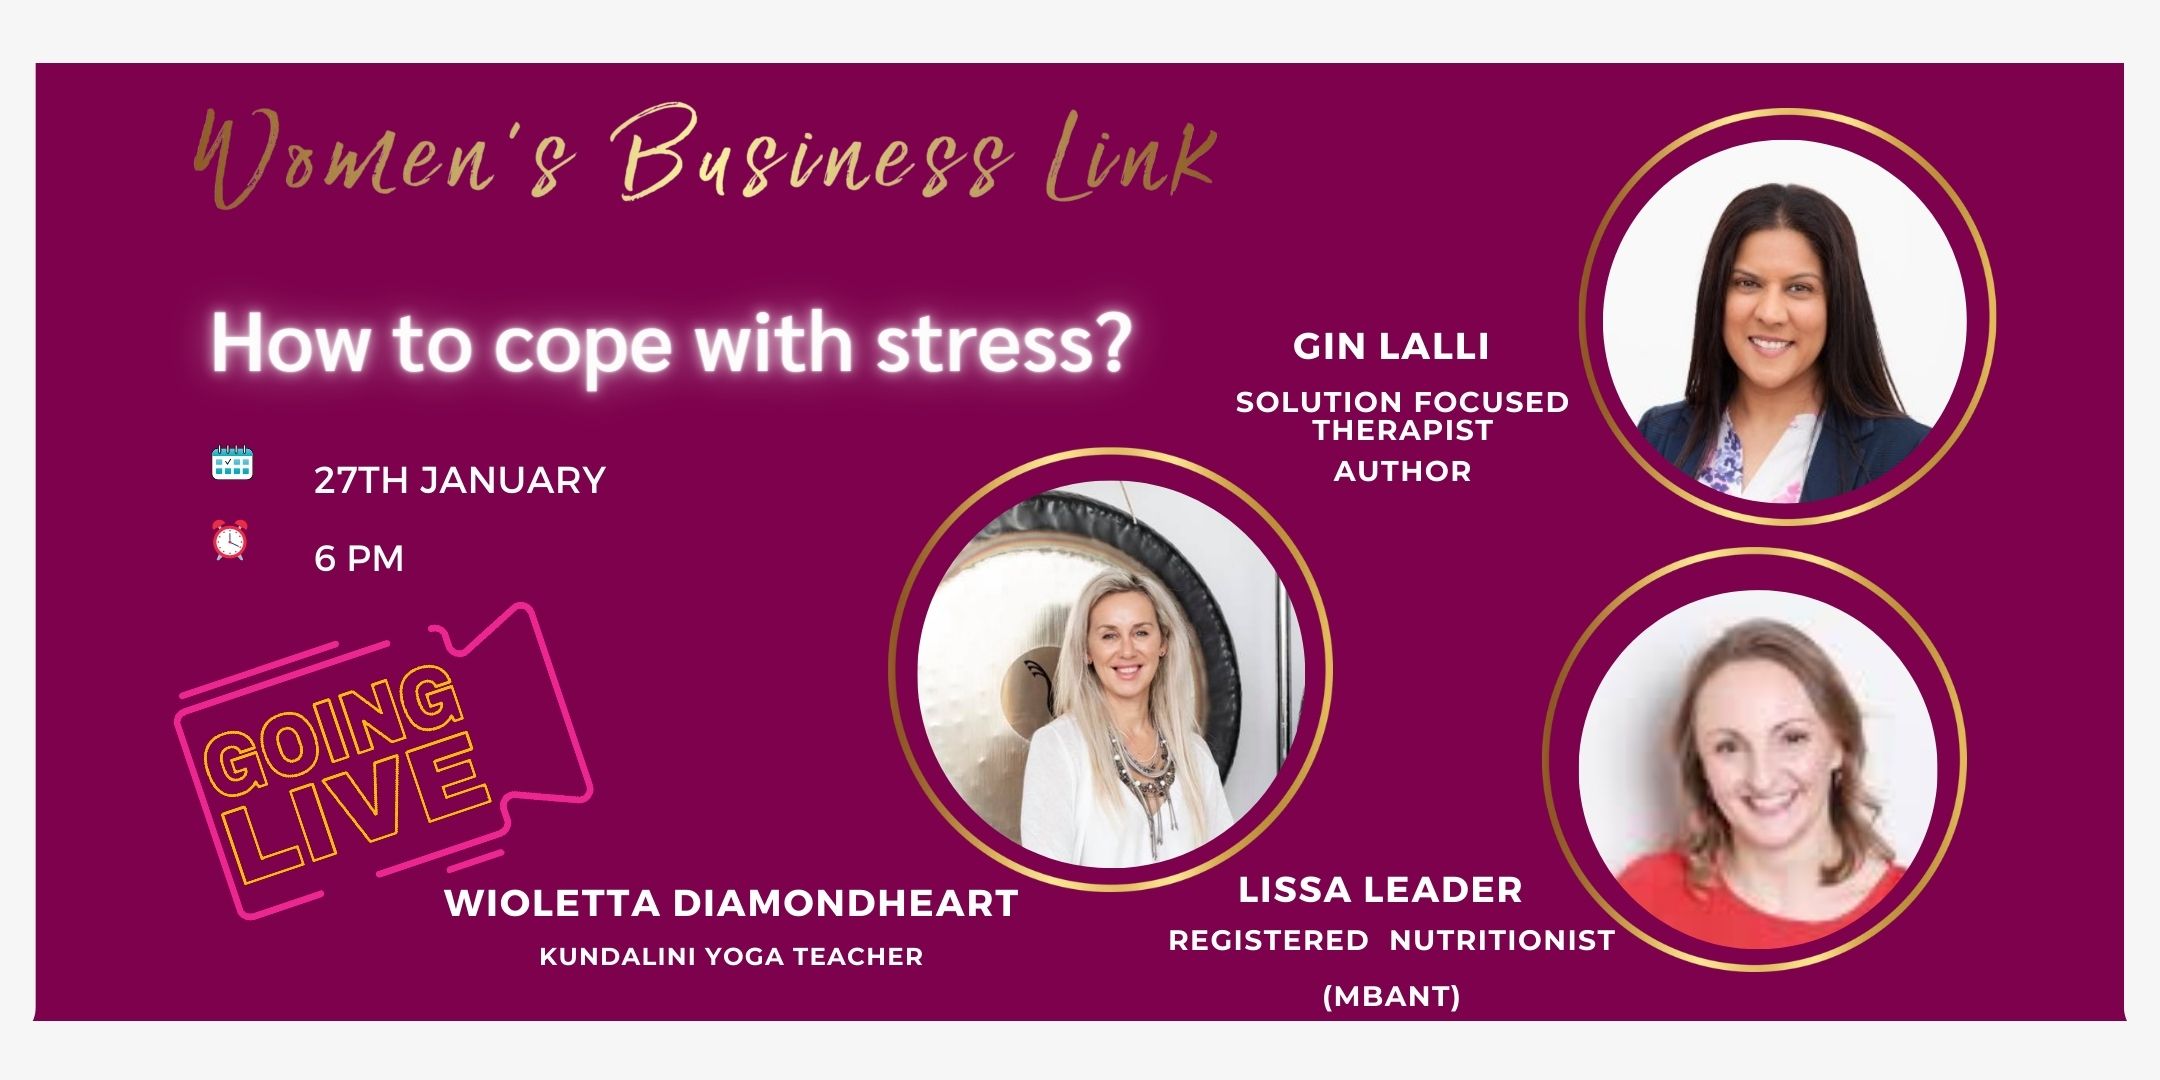 Women's Business Link event: How to cope with stress.